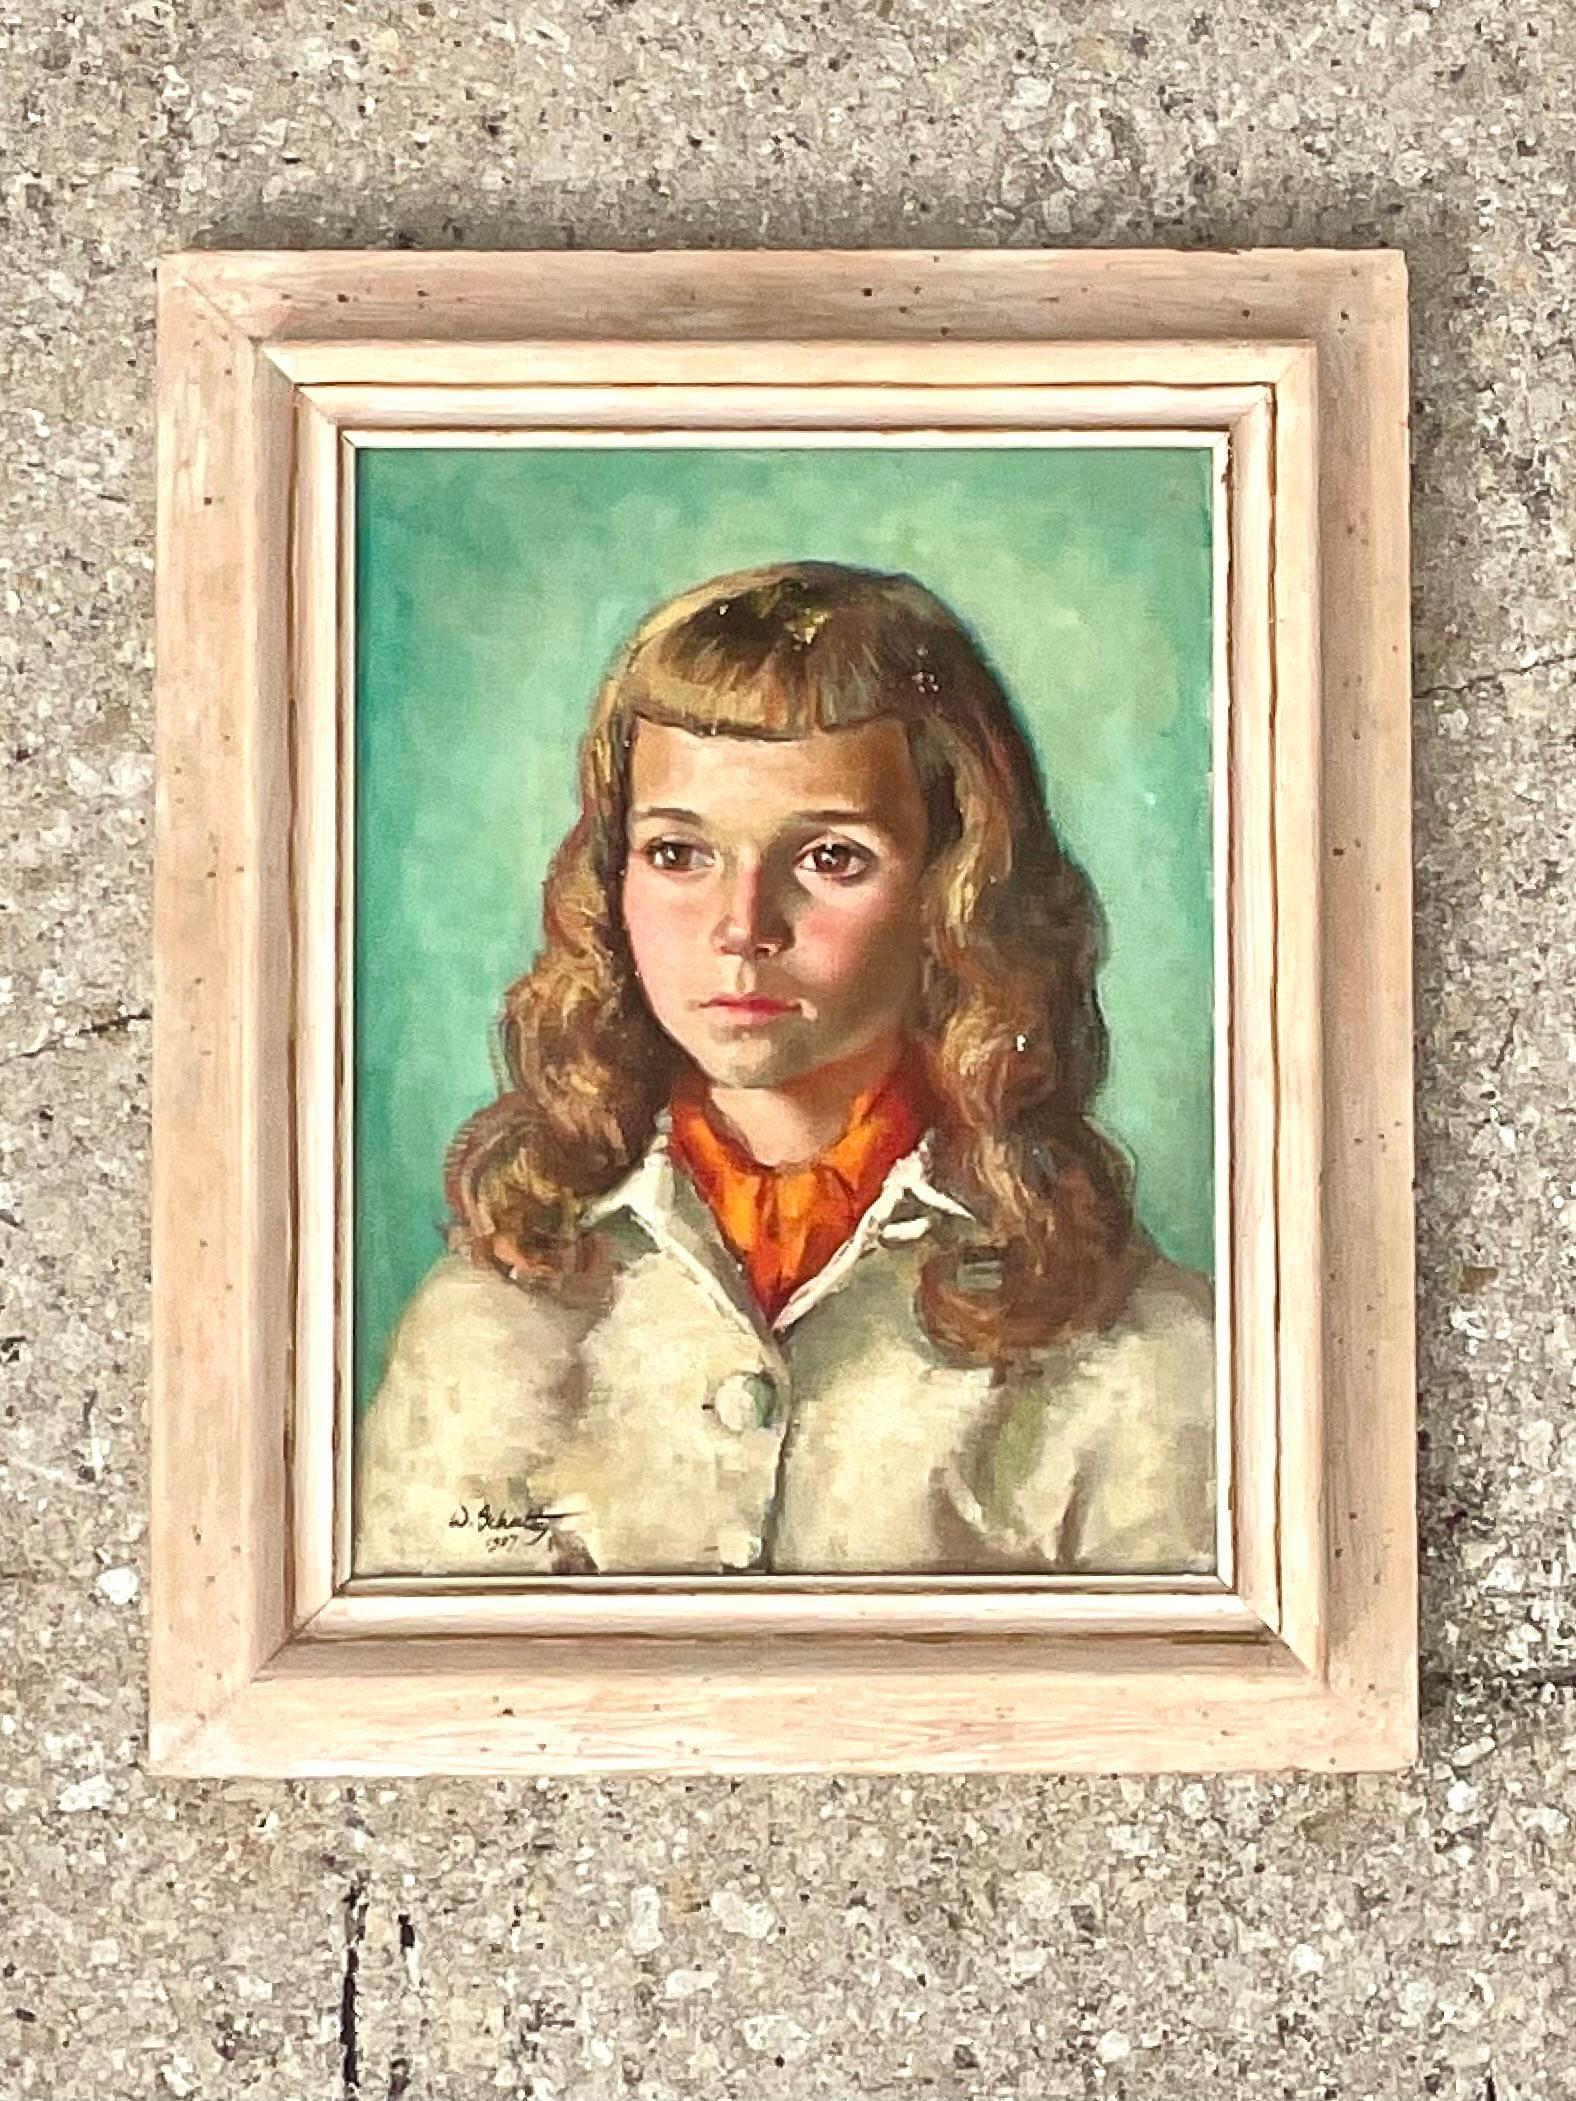 Fantastic vintage original oil portrait of a young woman. Beautiful clear colors with a stylish looking girl. Signed and dated. Acquired from a Palm Beach estate. less
